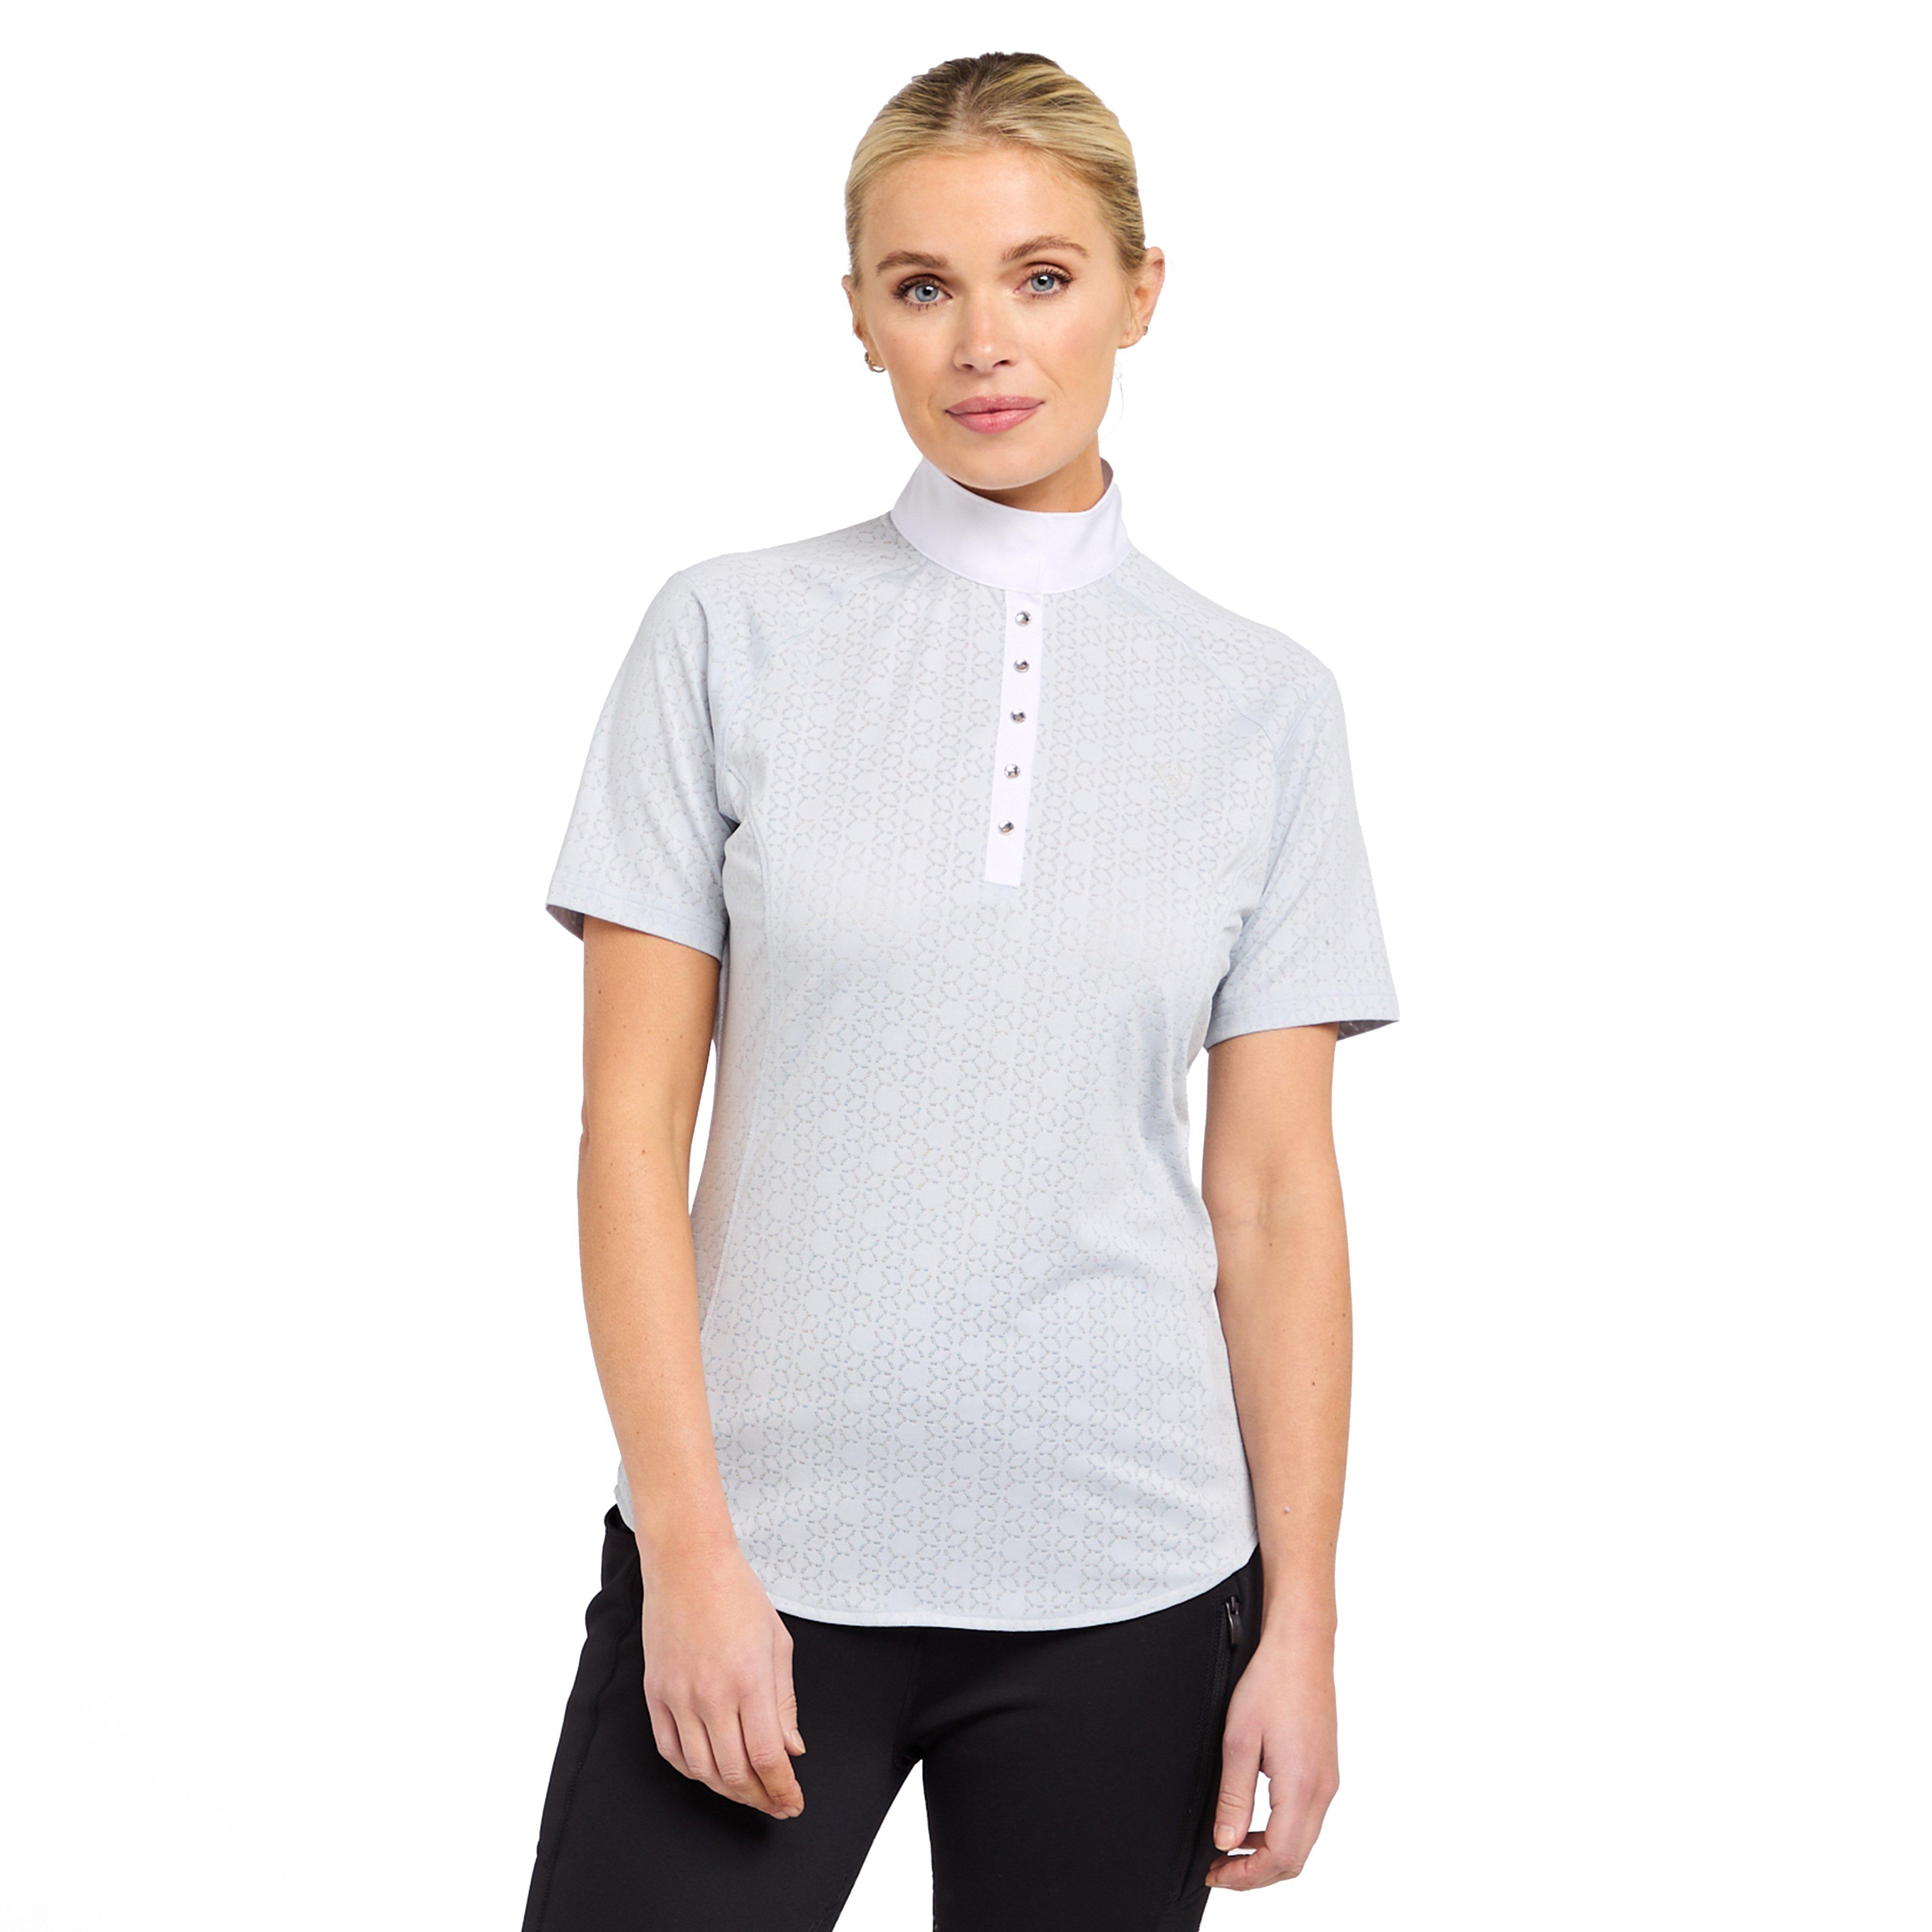 Womens Showstopper 2.0 Short Sleeved Shirt Pearl Grey